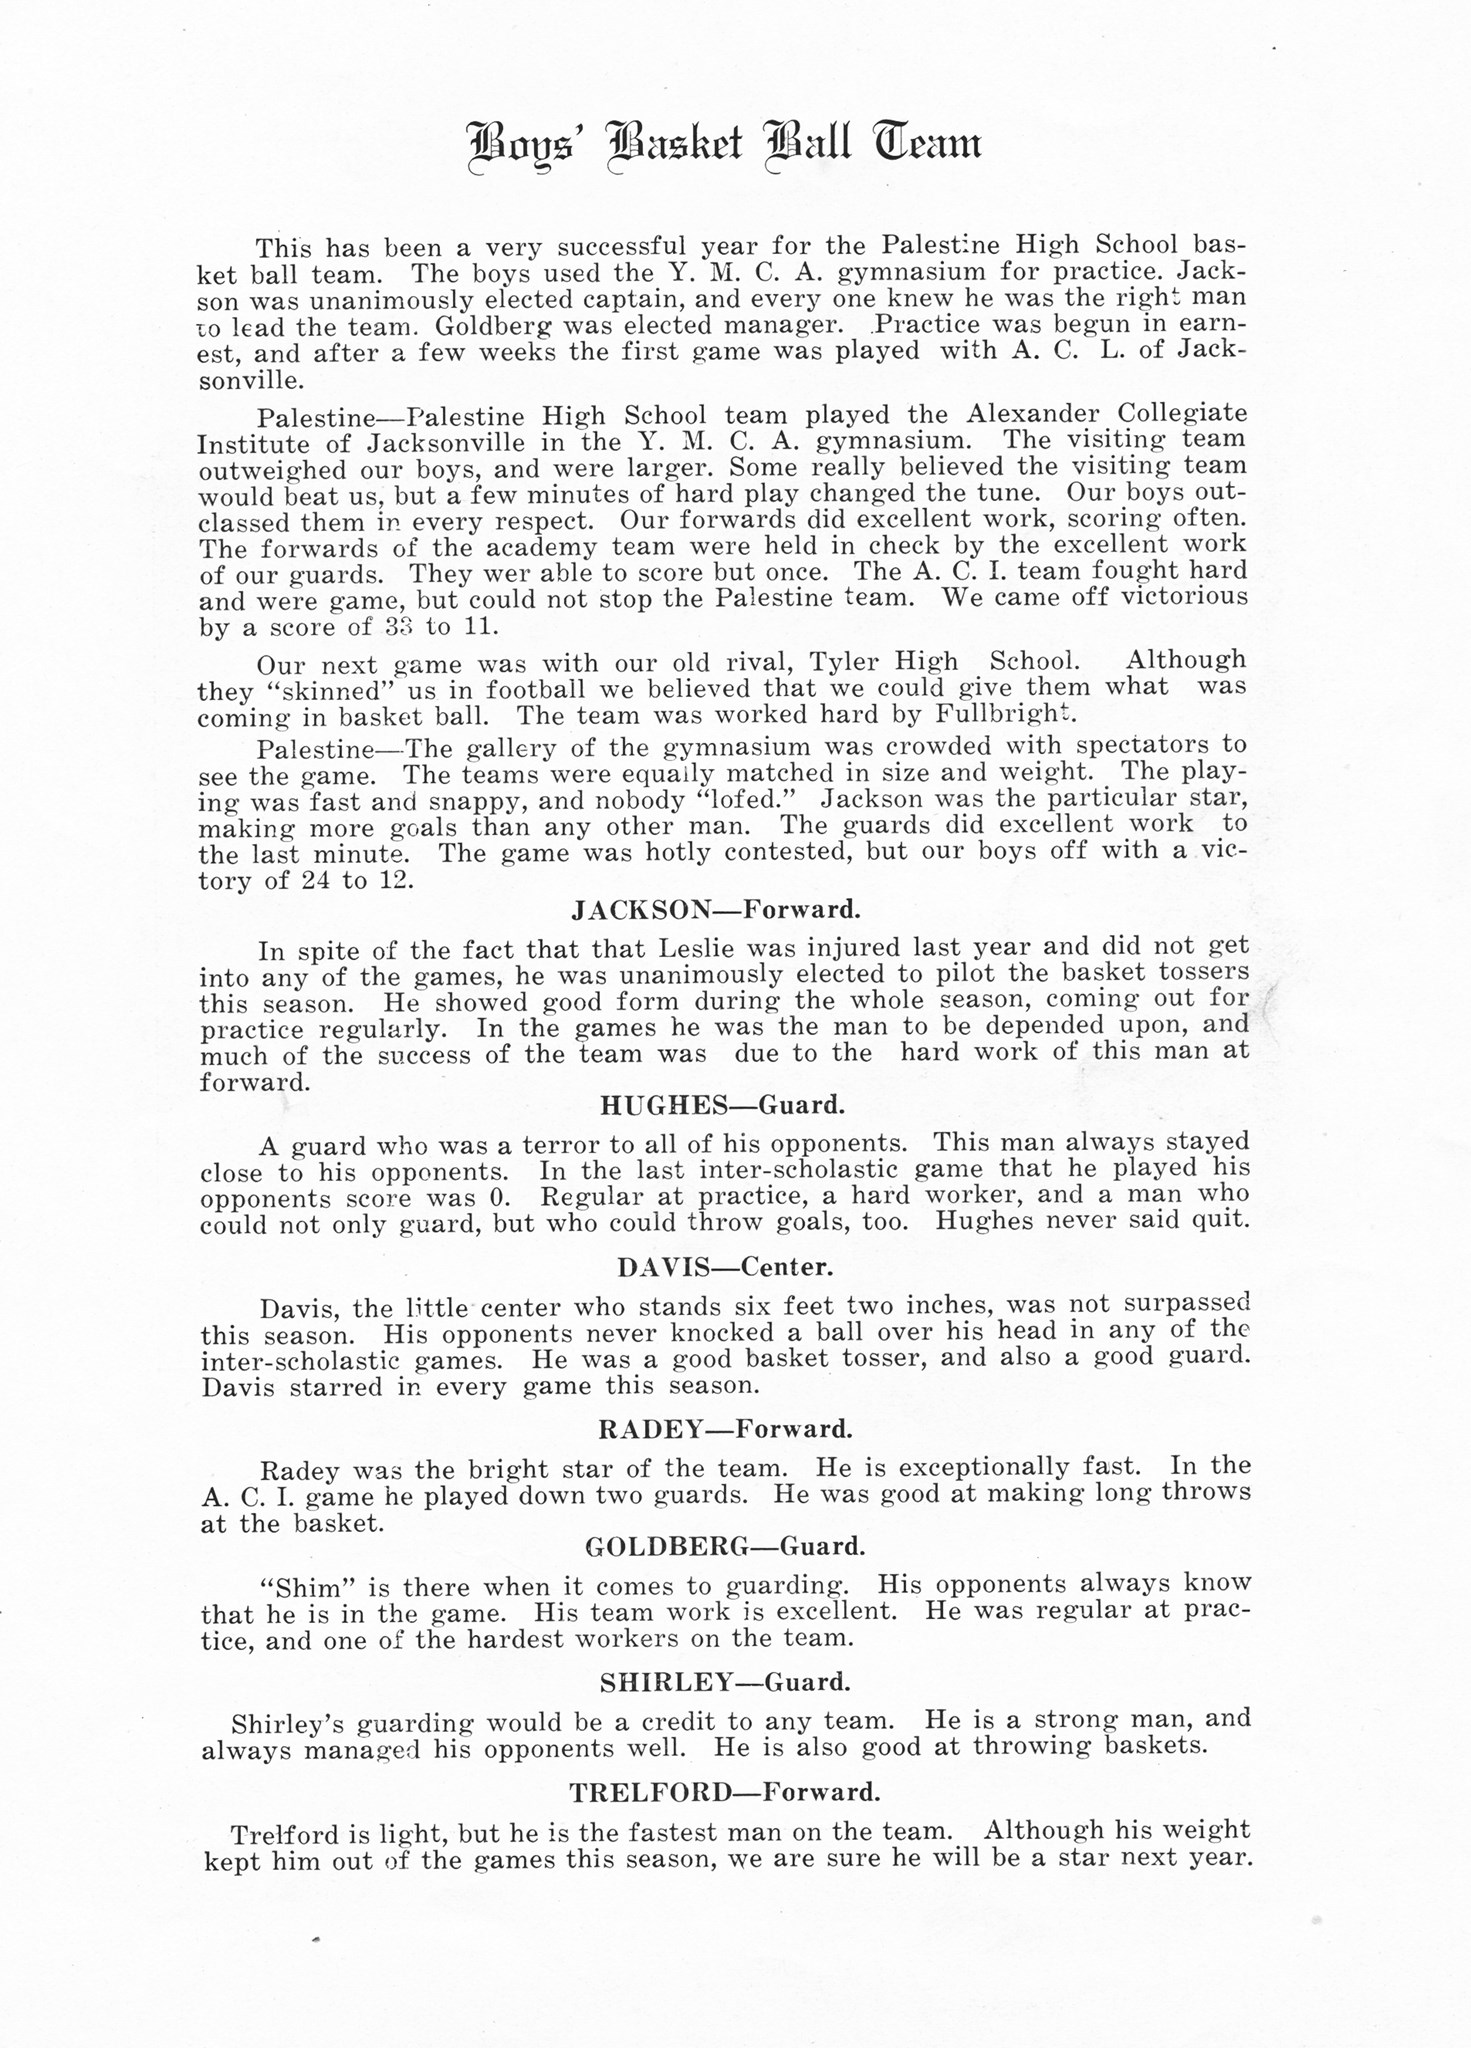 ../../../Images/Large/1912/Arclight-1912-pg0049.jpg